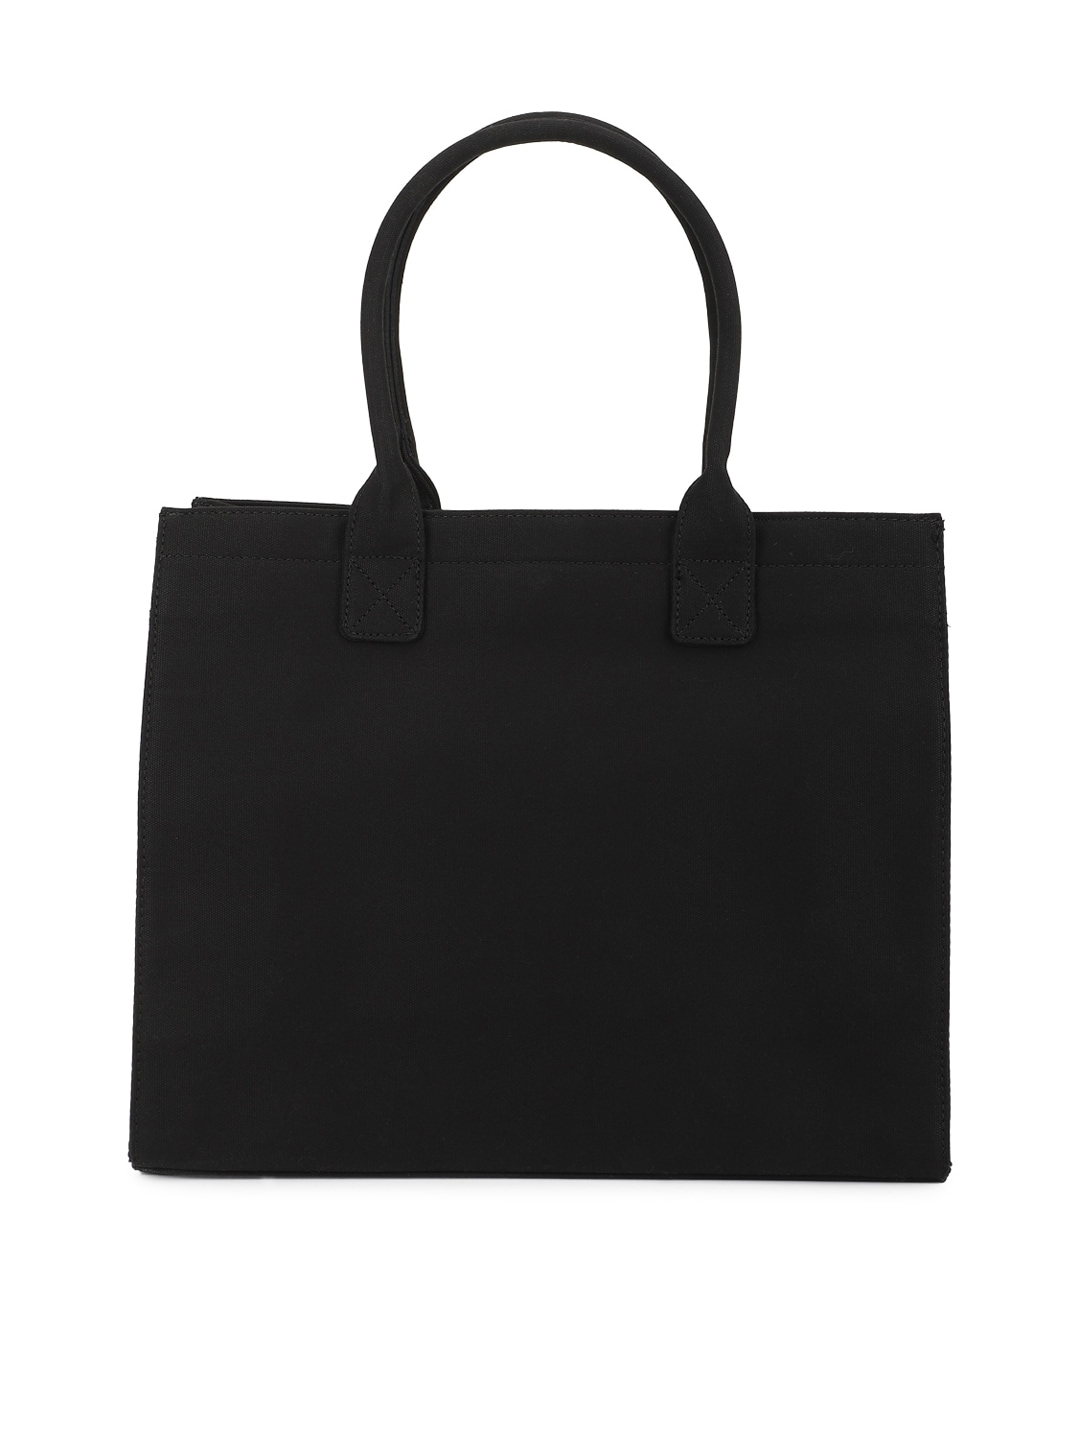 FOREVER 21 Black Oversized Structured Tote Bag Price in India